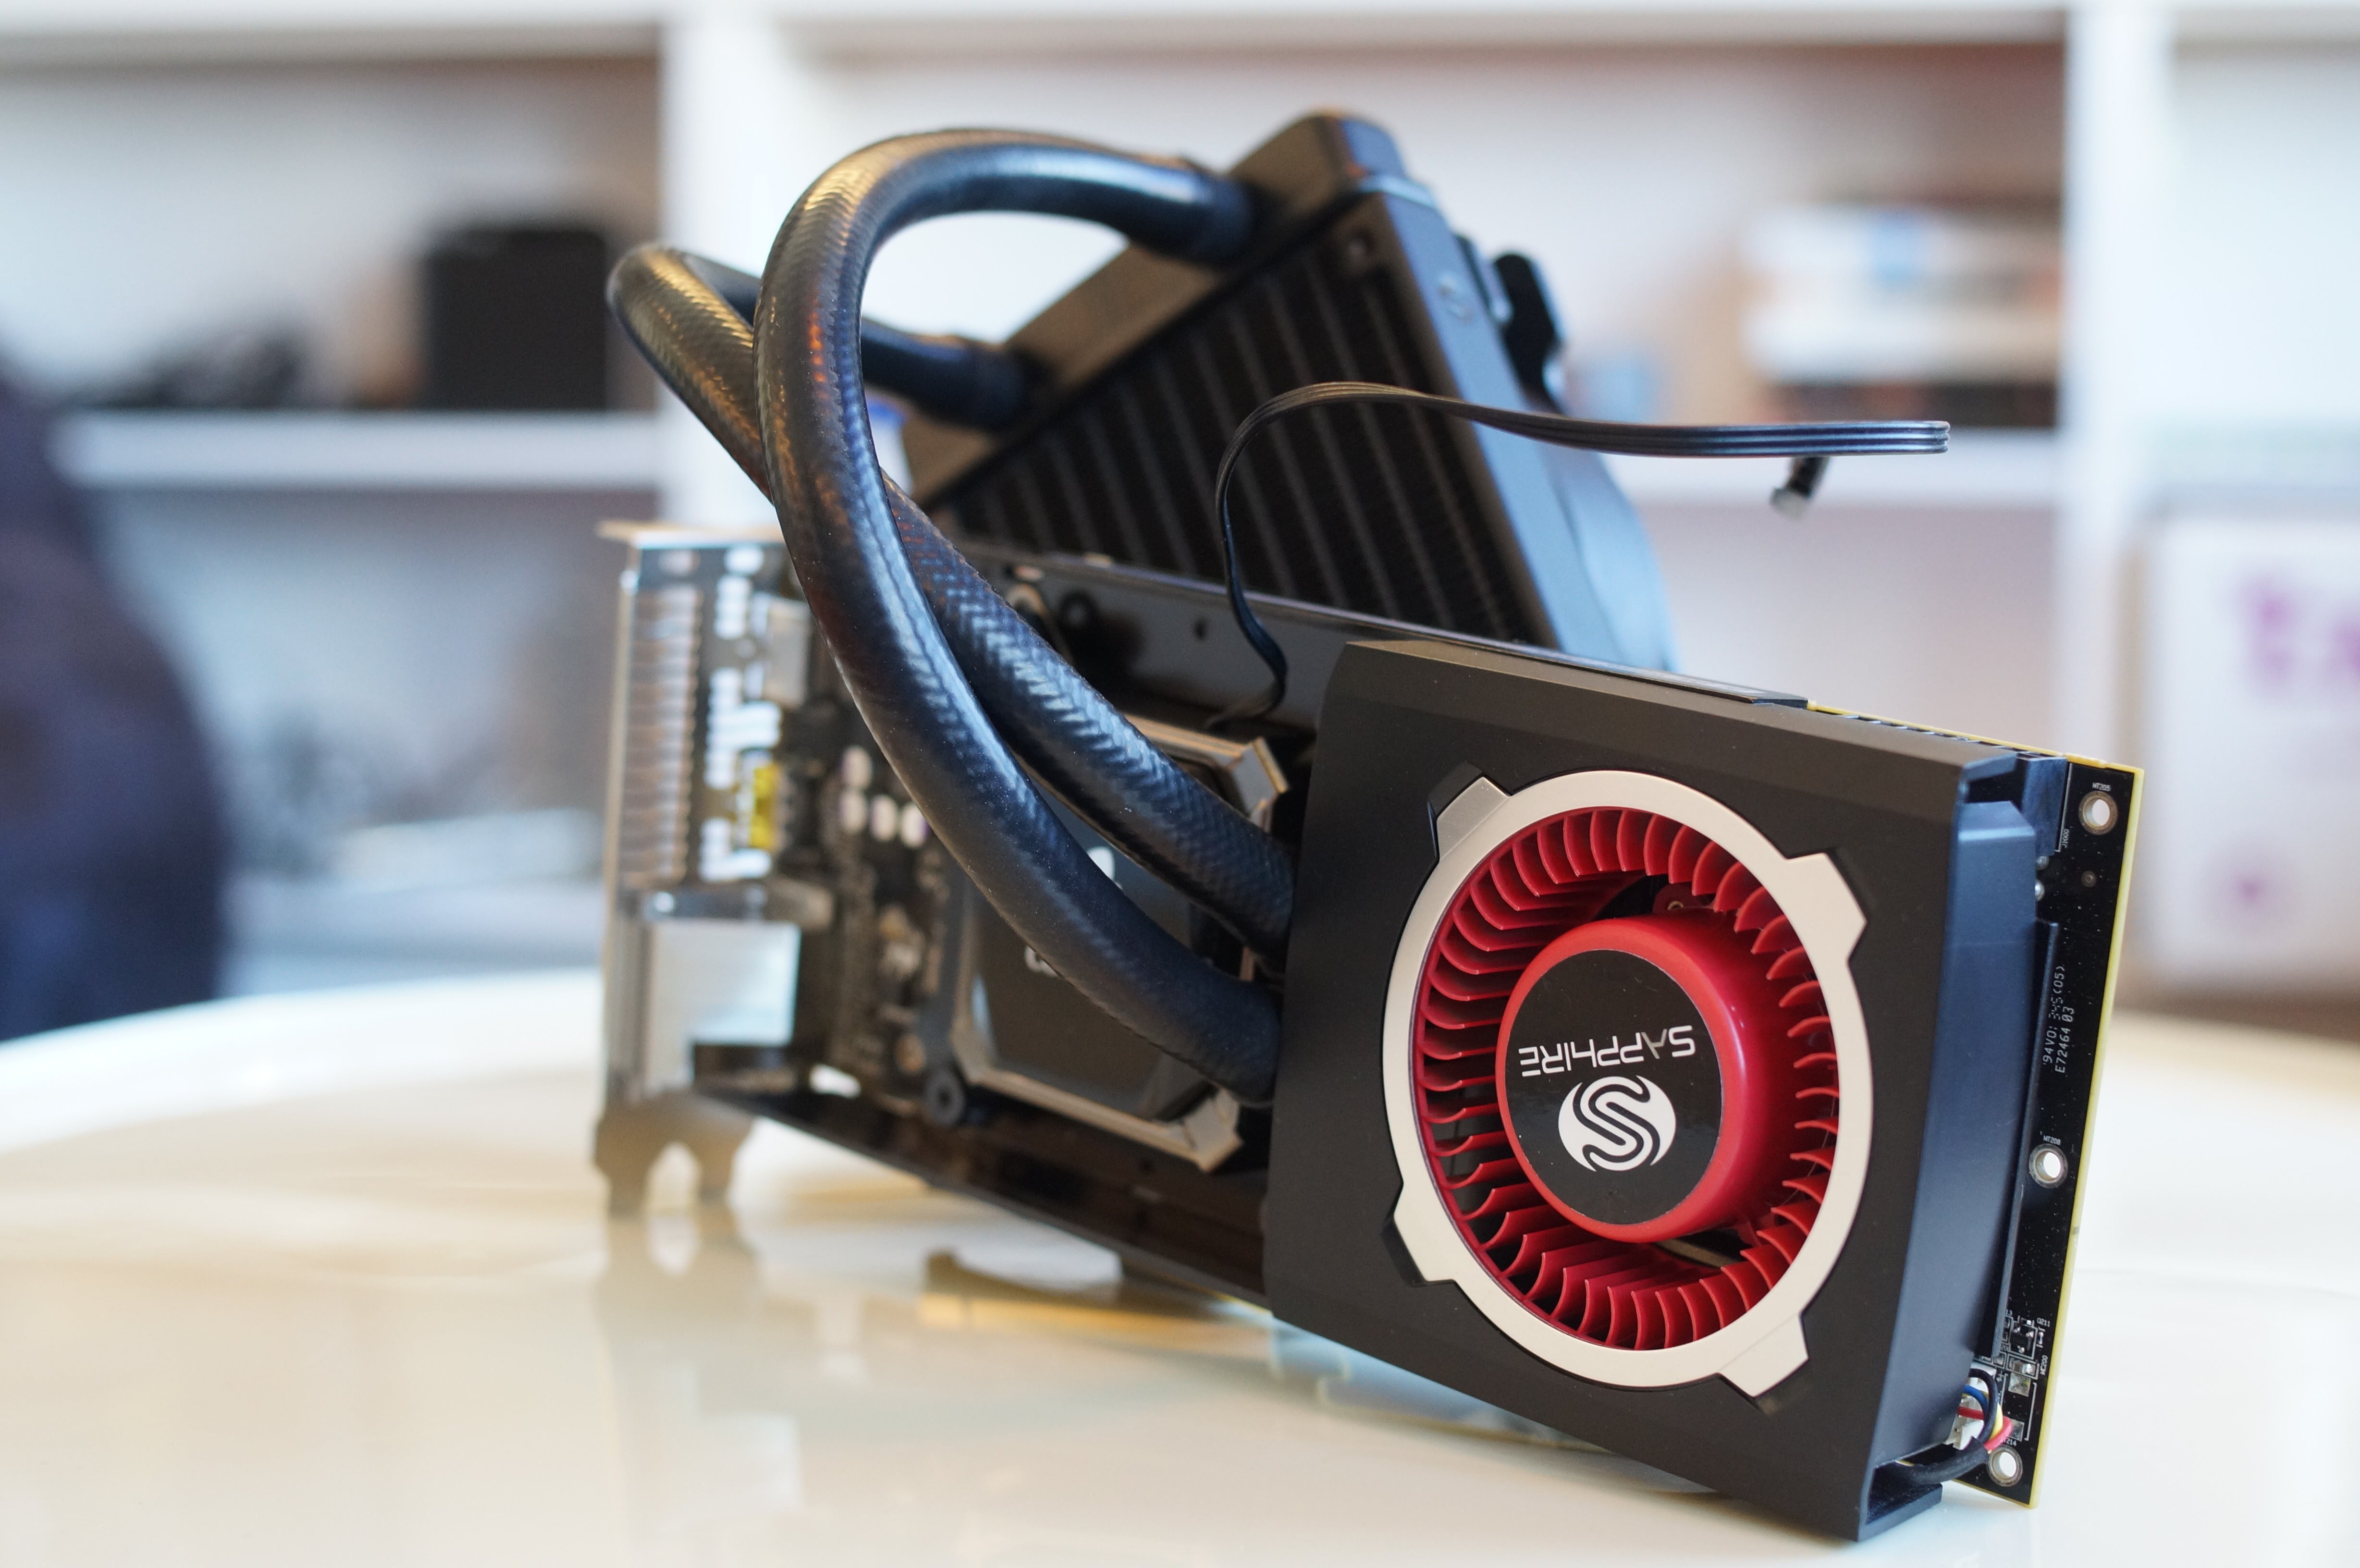 How to liquid-cool your graphics card in 20 minutes